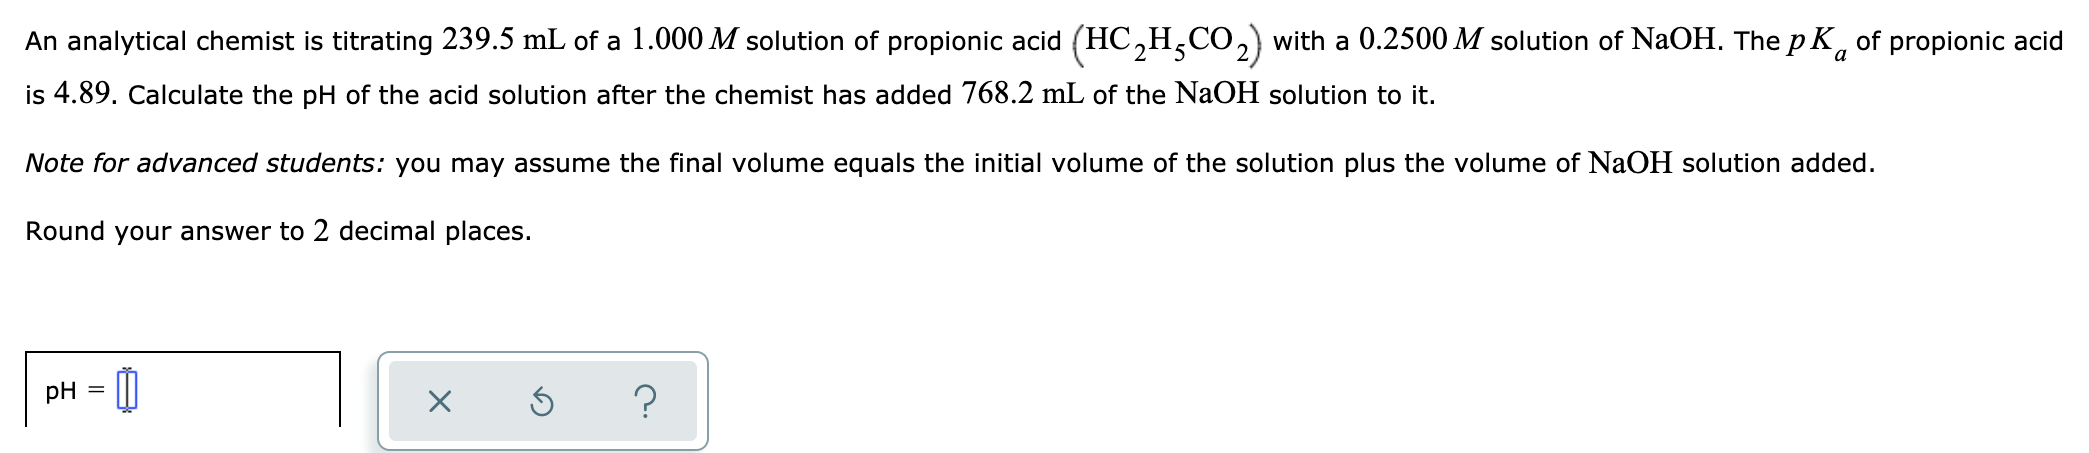 An analytical chemist is titrating 239.5 mL of a 1.000 M solution of propionic acid (HC,H,CO, with a 0.2500 M solution of NaOH. The pK, of propionic acid
is 4.89. Calculate the pH of the acid solution after the chemist has added 768.2 mL of the NaOH solution to it.
Note for advanced students: you may assume the final volume equals the initial volume of the solution plus the volume of NaOH solution added.
Round your answer to 2 decimal places.
